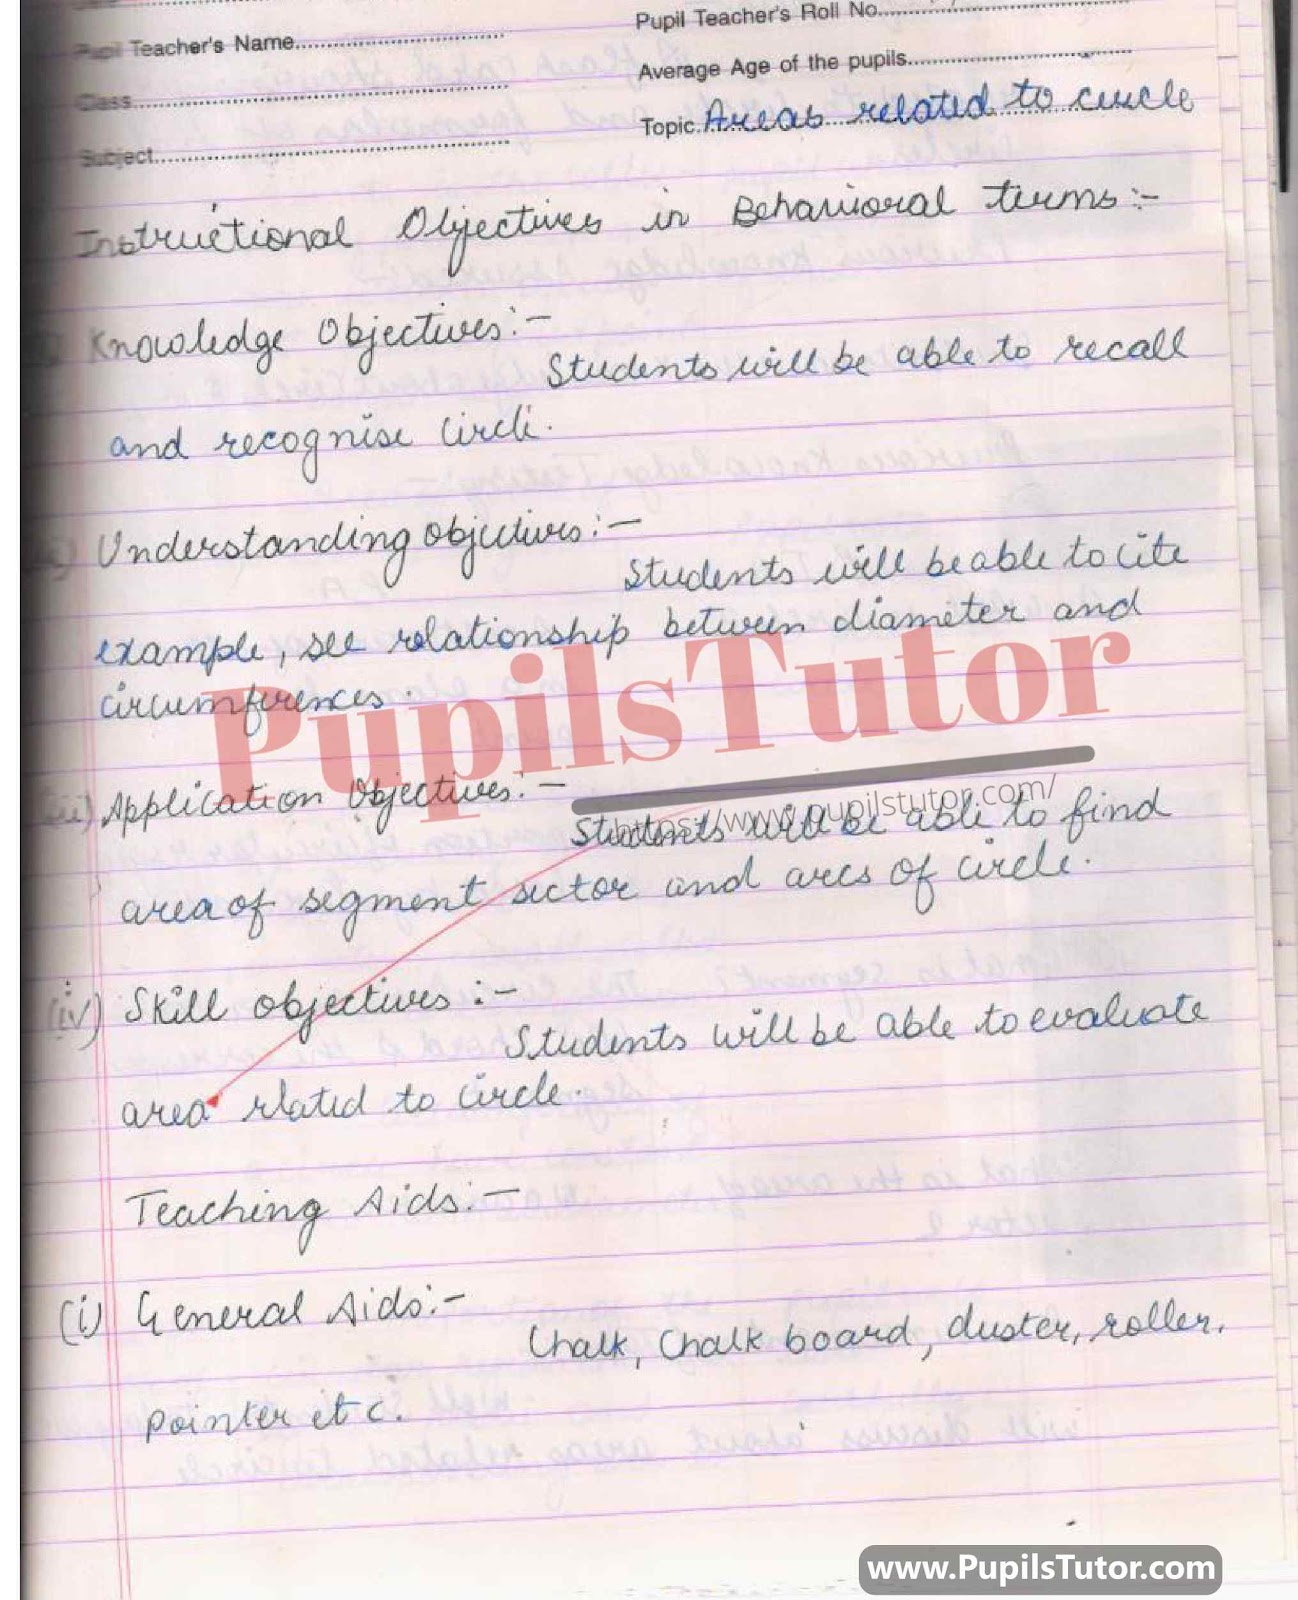 Mathematics Lesson Plan For Class 10 To 12 On Area Of Sector And Segment Of Circle – (Page And Image Number 1) – Pupils Tutor